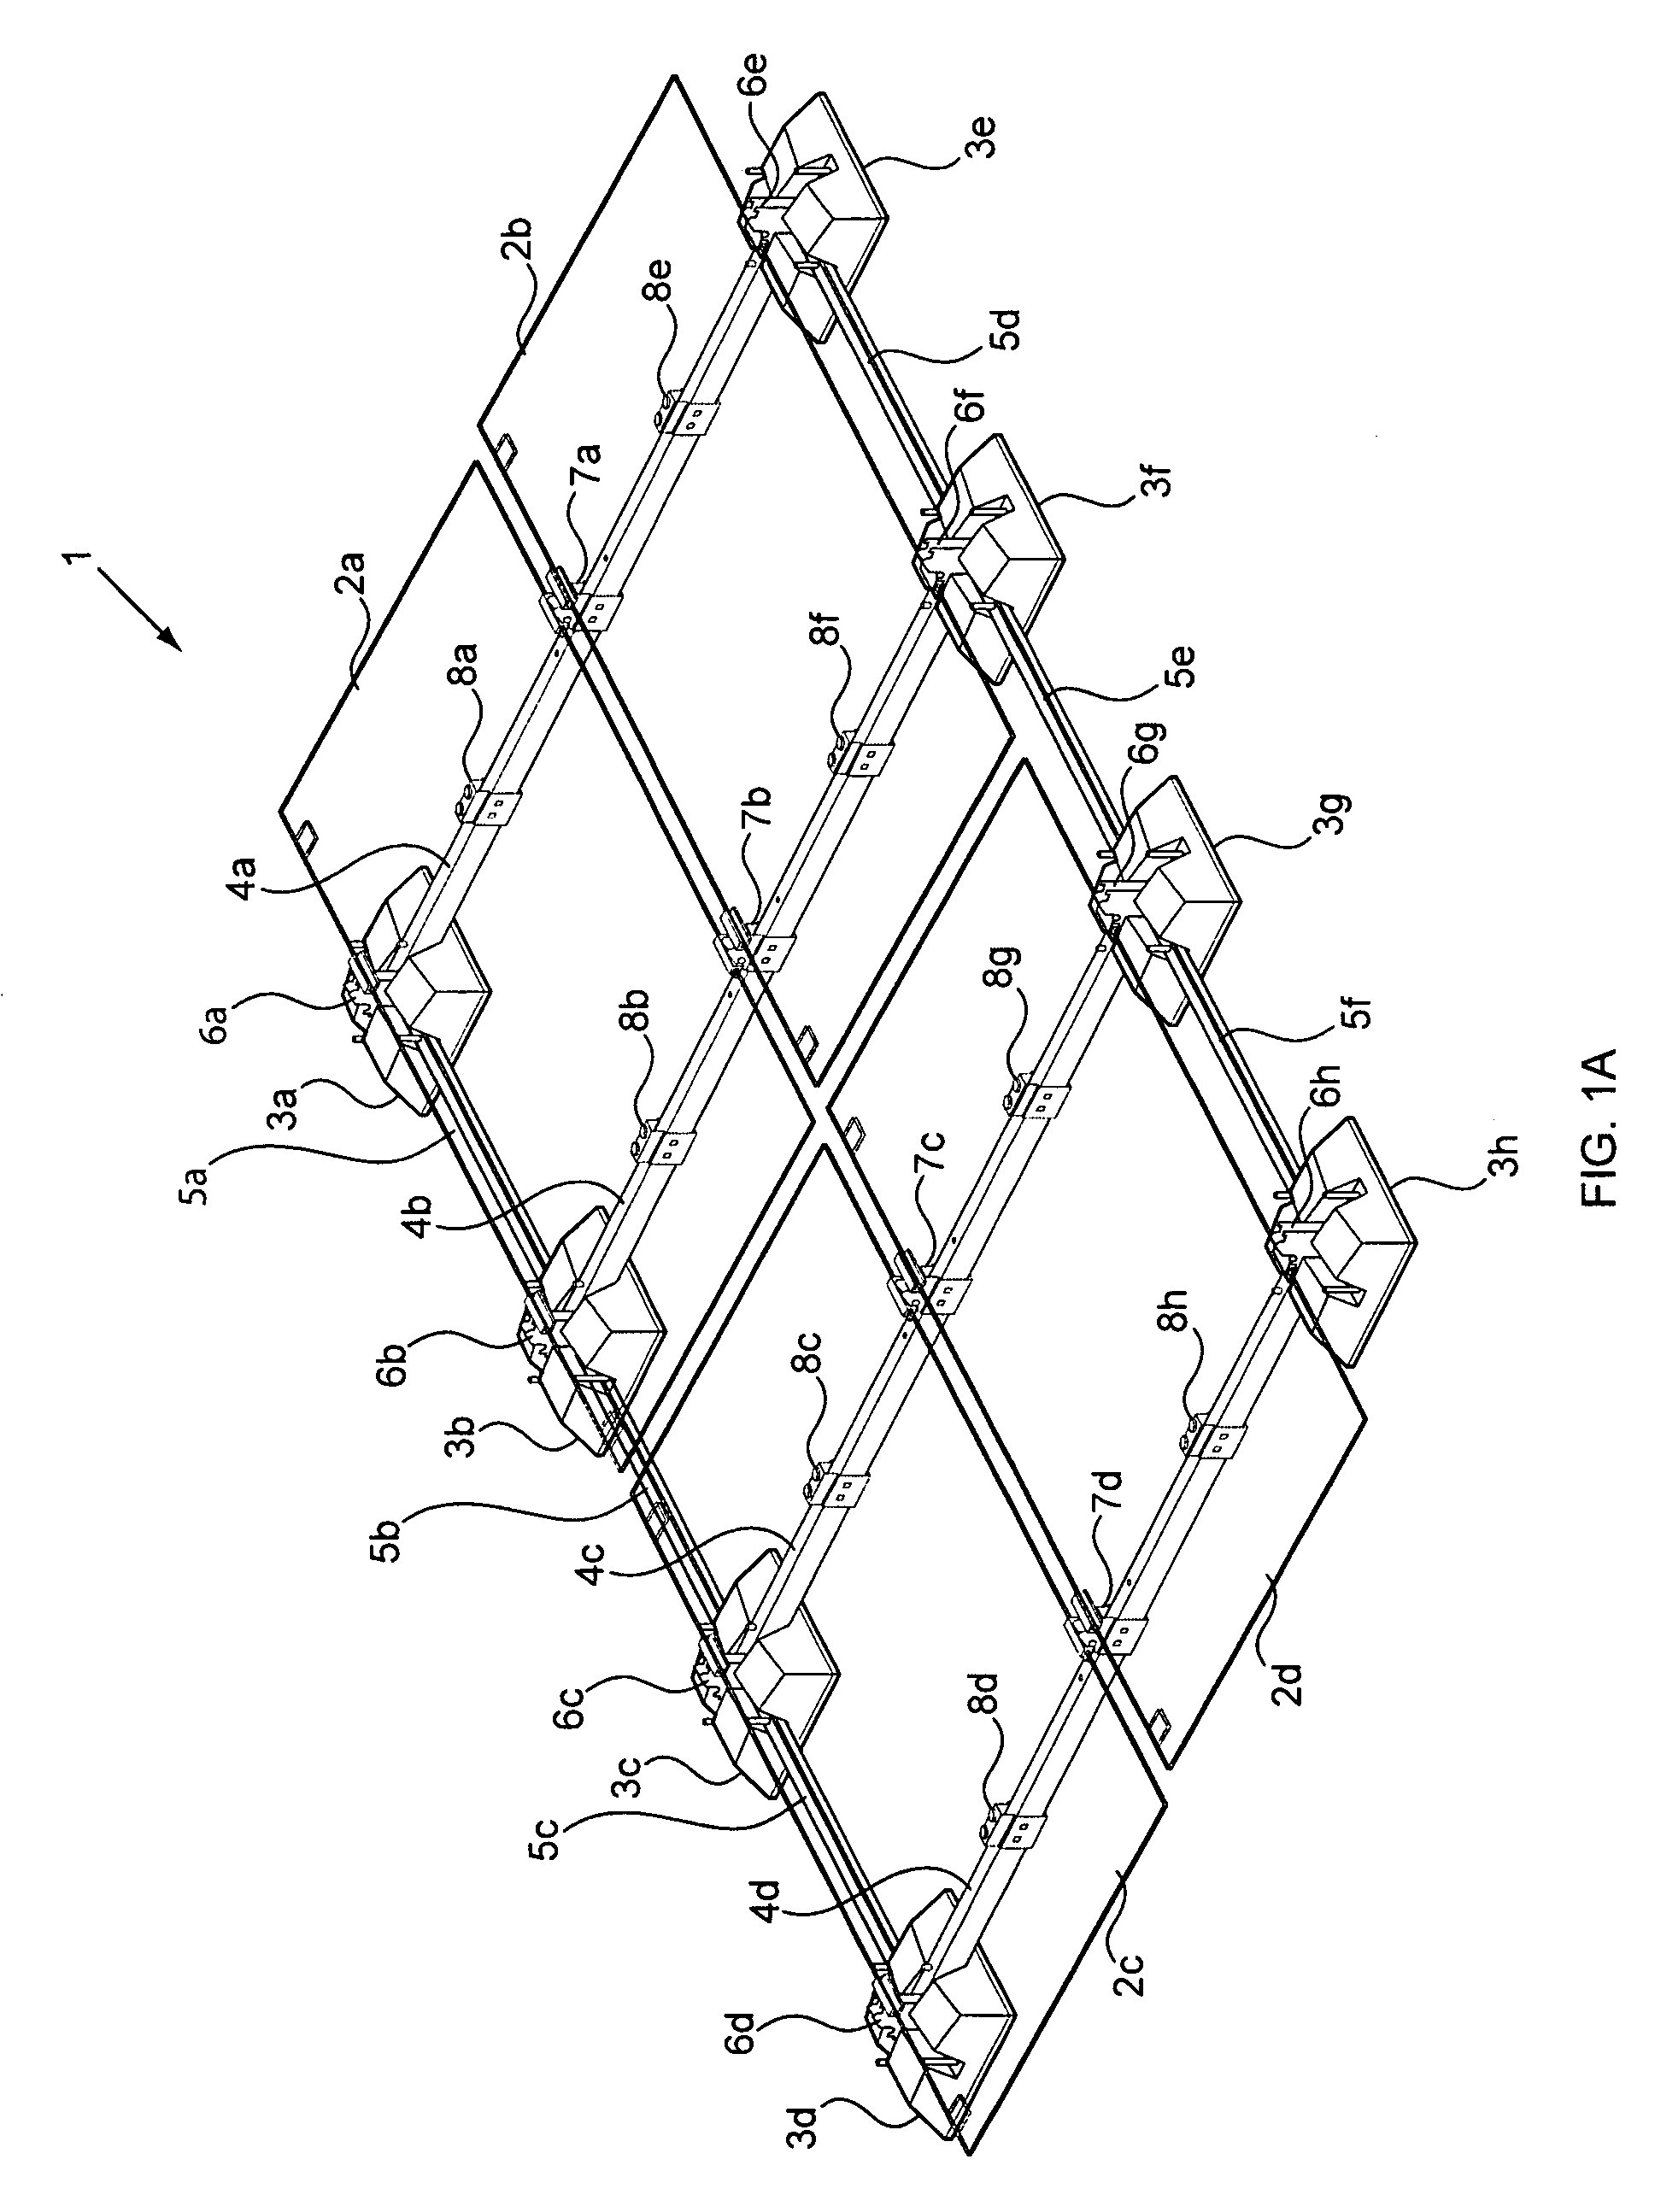 Photovoltaic module mounting system